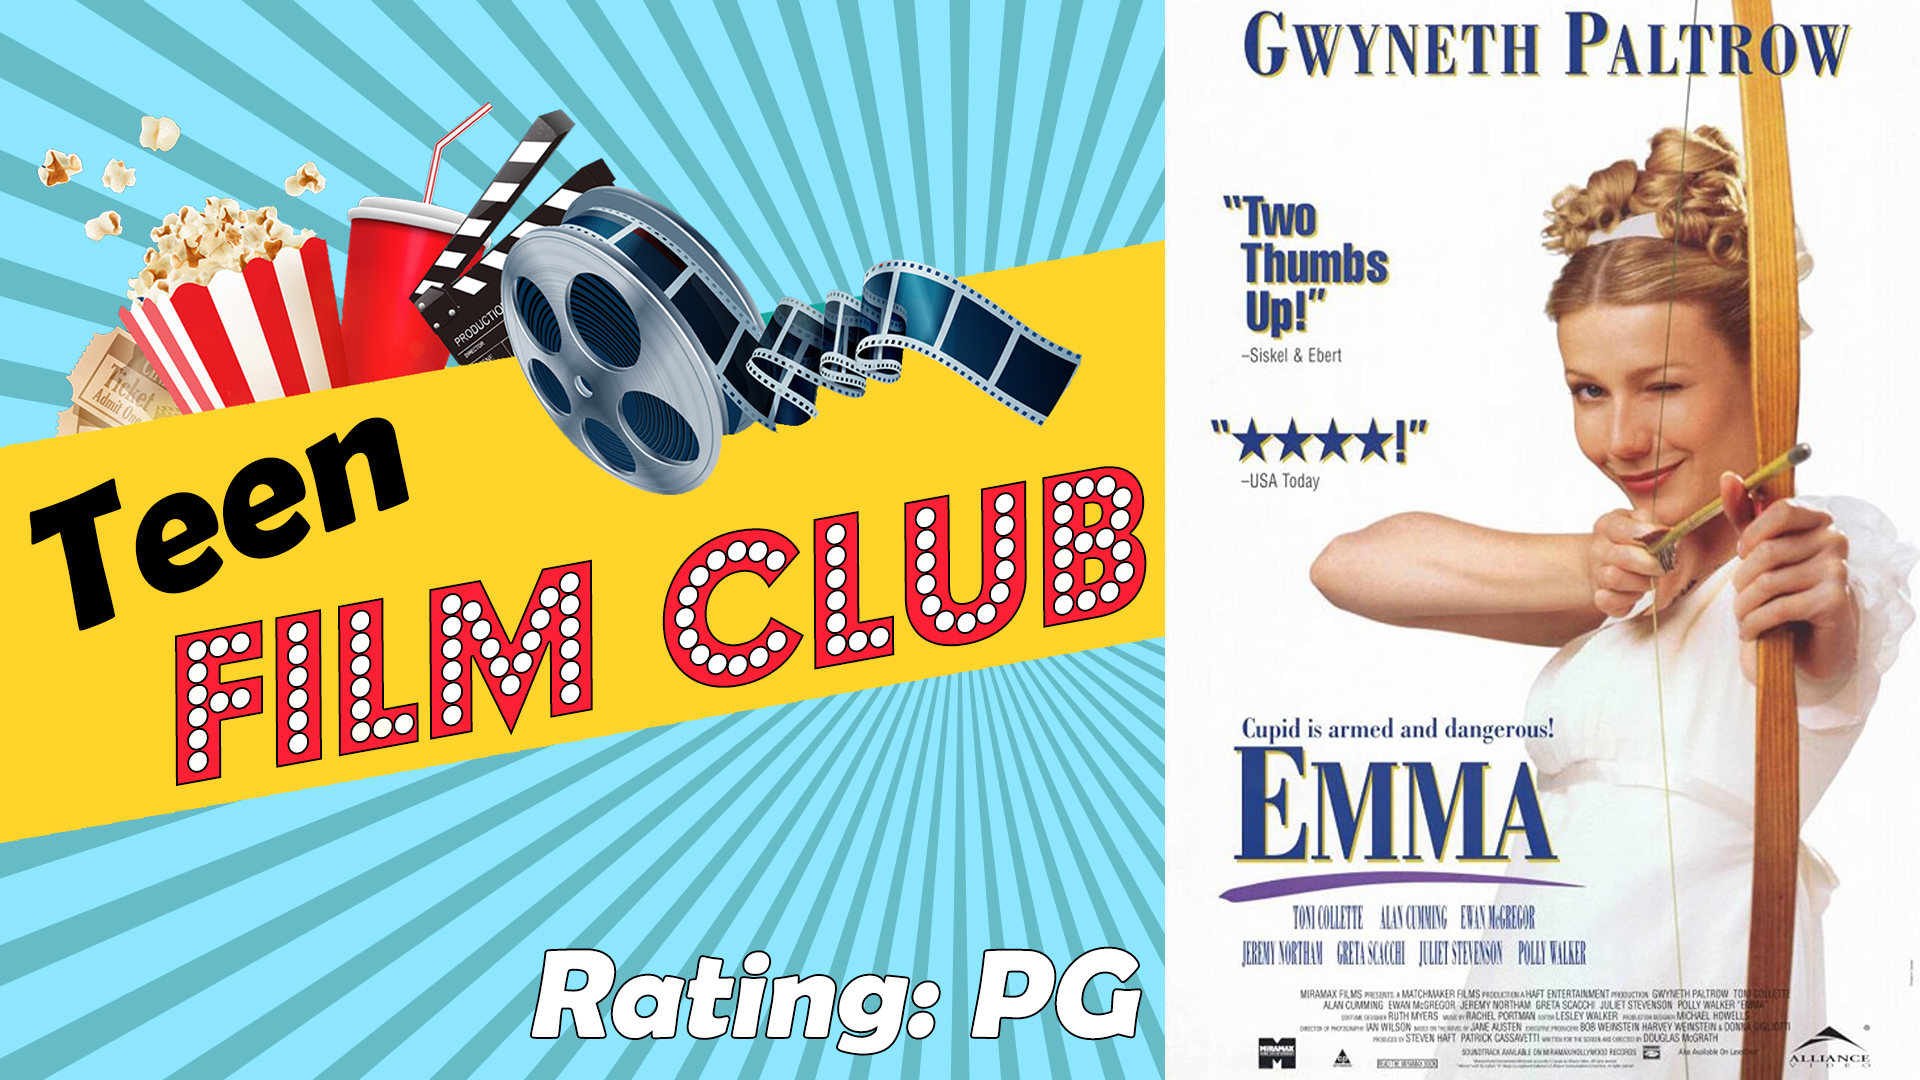 Image reads "Teen Film Club" against a gold banner on a blue sunburst background. A movie reel, cup, popcorn container, and tickets are on the top of the banner. A popcorn bucket with tickets in the bucket are in the bottom right corner. The movie poster for "Emma" is to the right of the title.